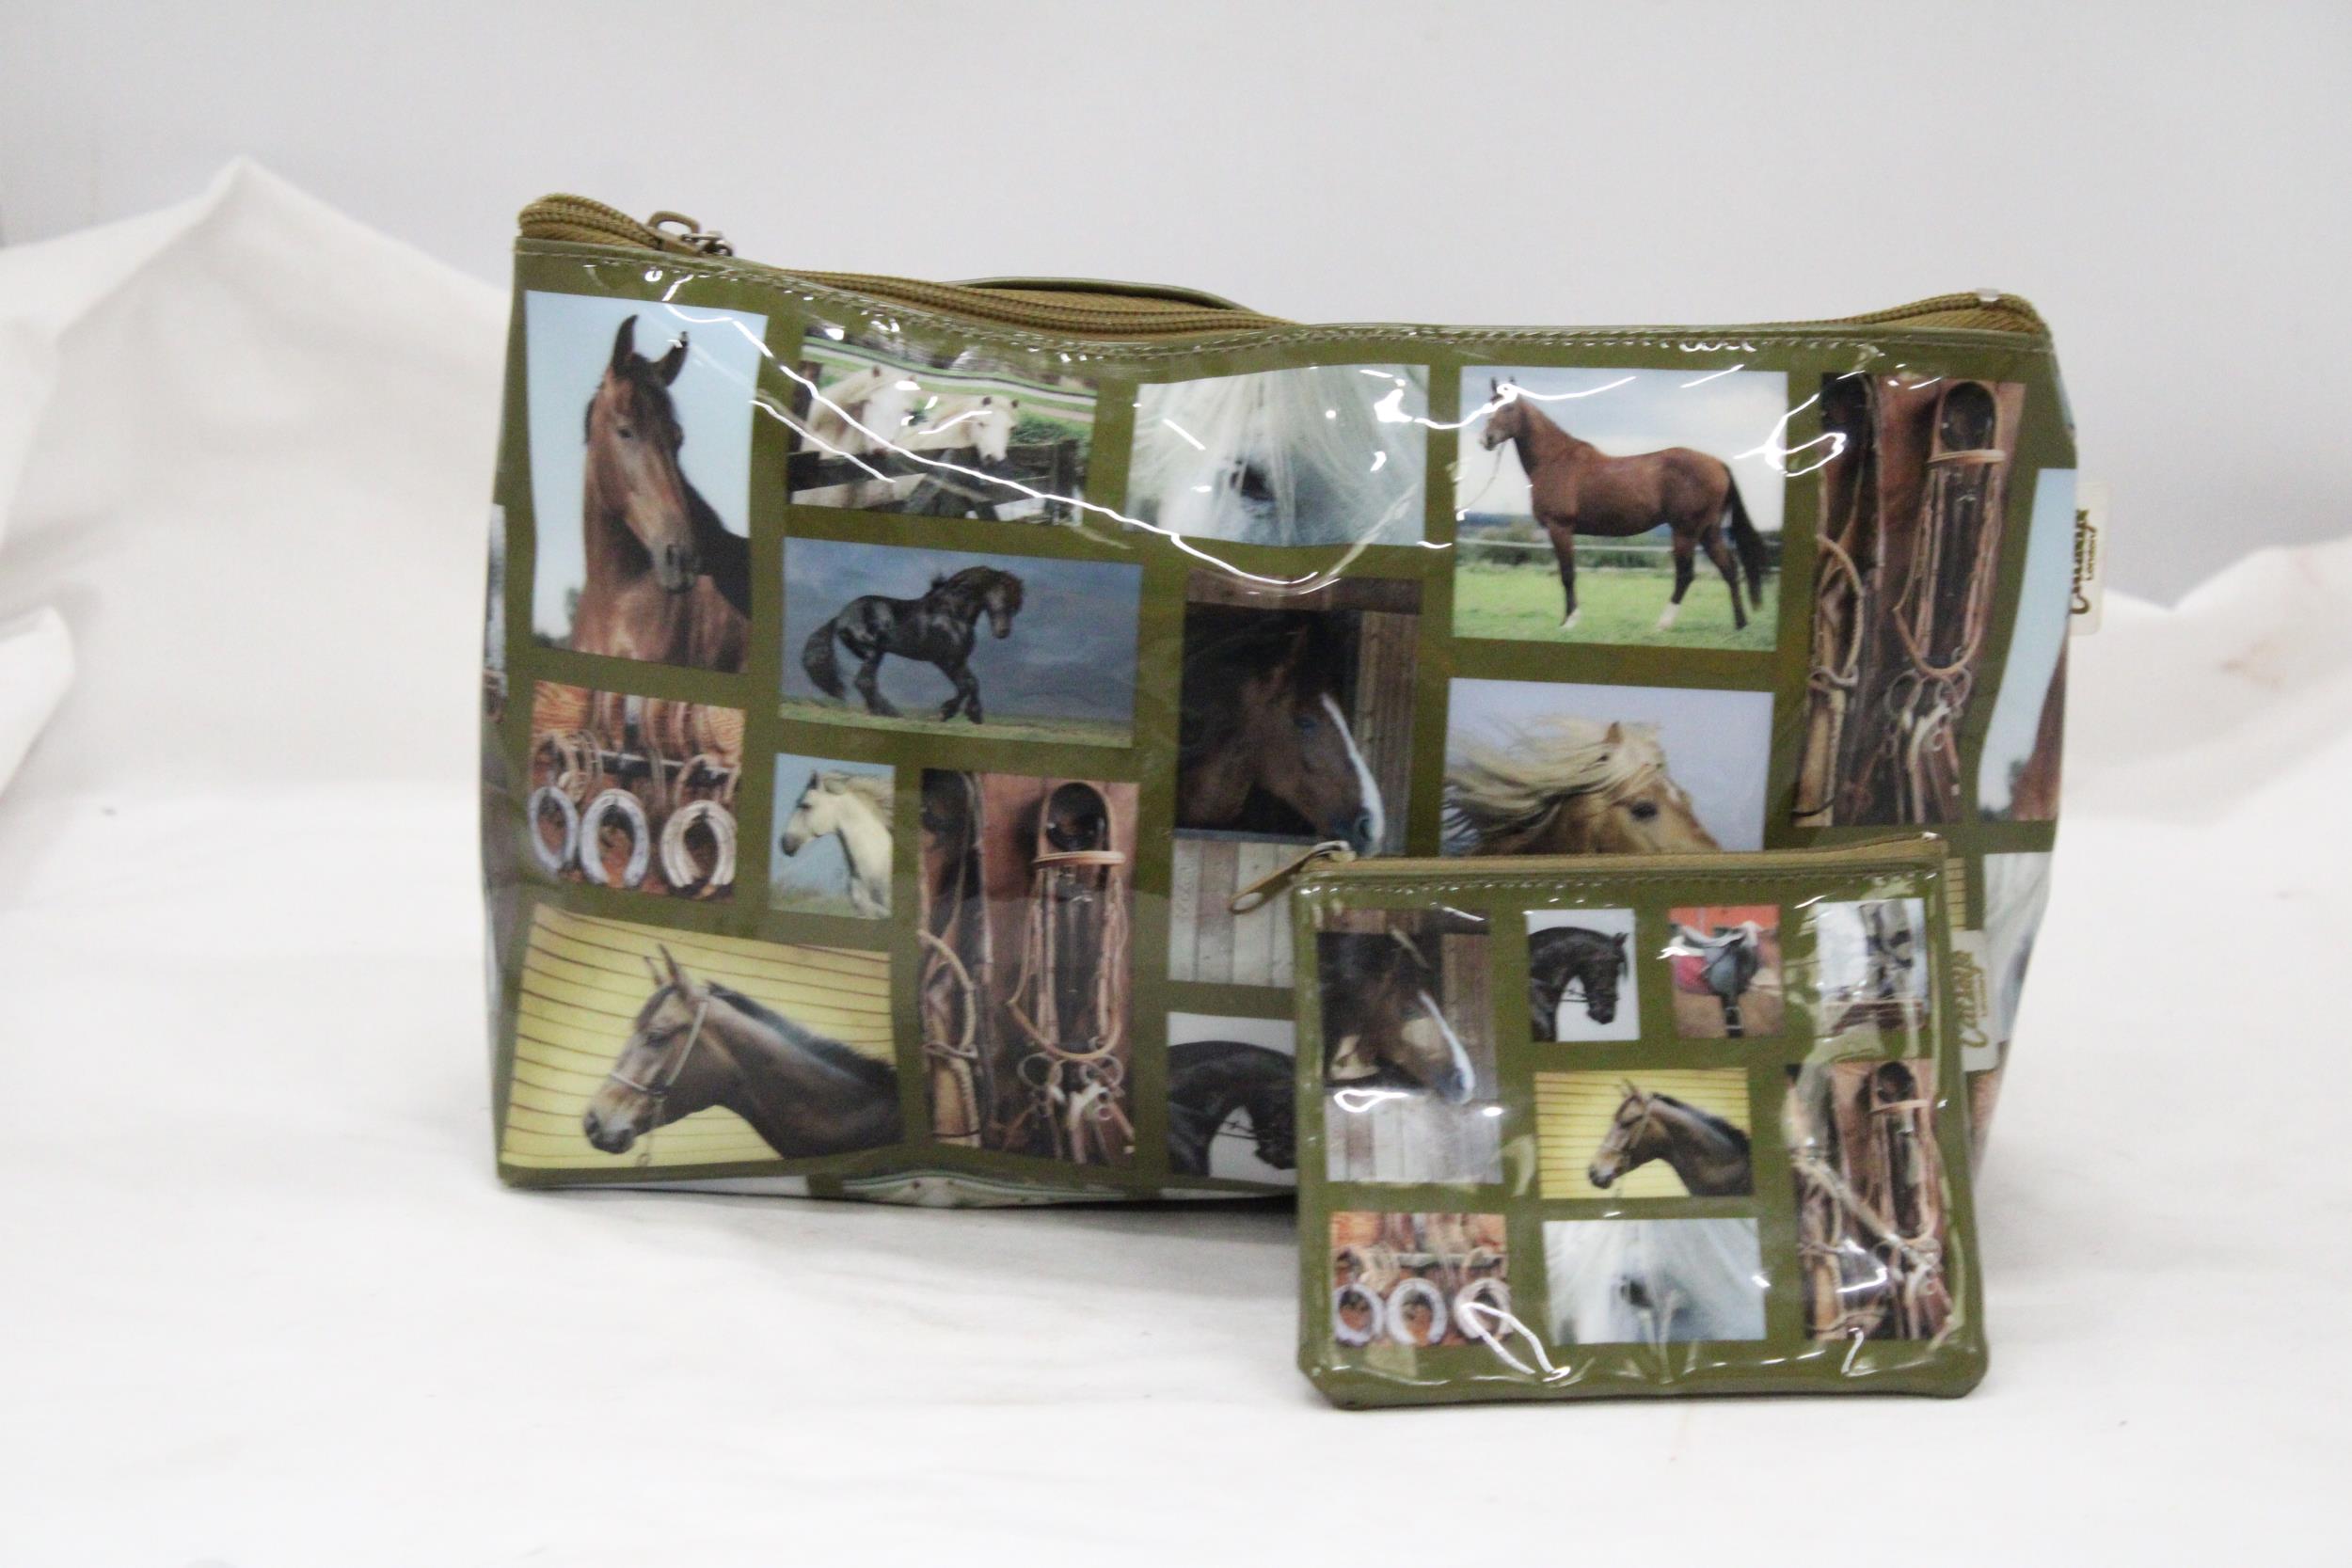 A DESIGNER "HORSEY" BAG WITH A MATCHING PURSE BY CATSEYE OF LONDON - Image 3 of 4